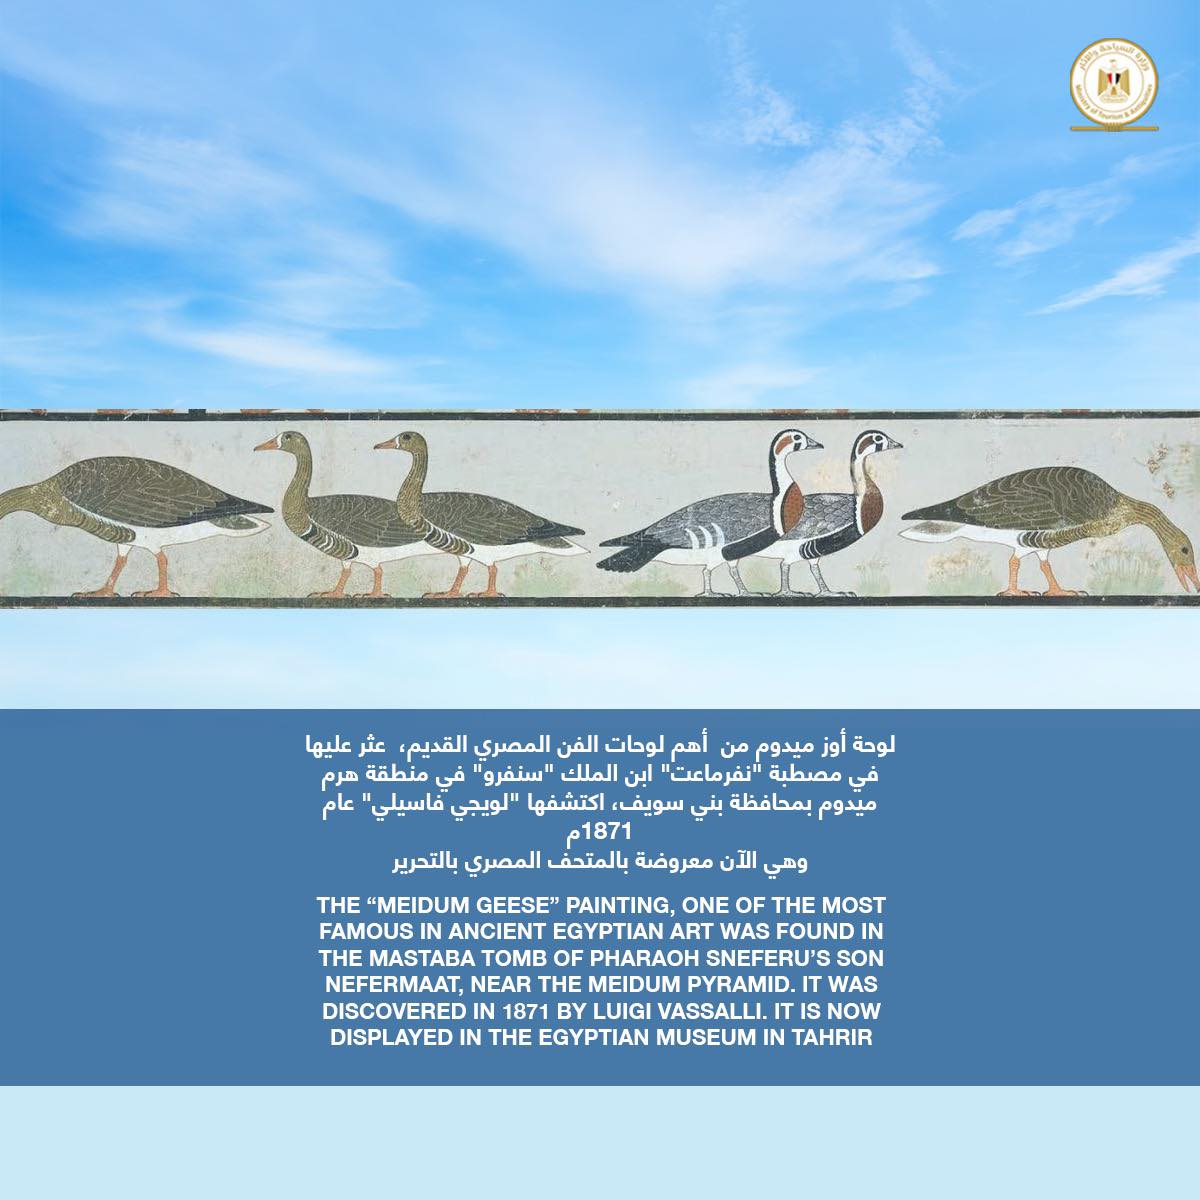 The "Meidum Geese Painting" - Min. of Tourism & Antiquities